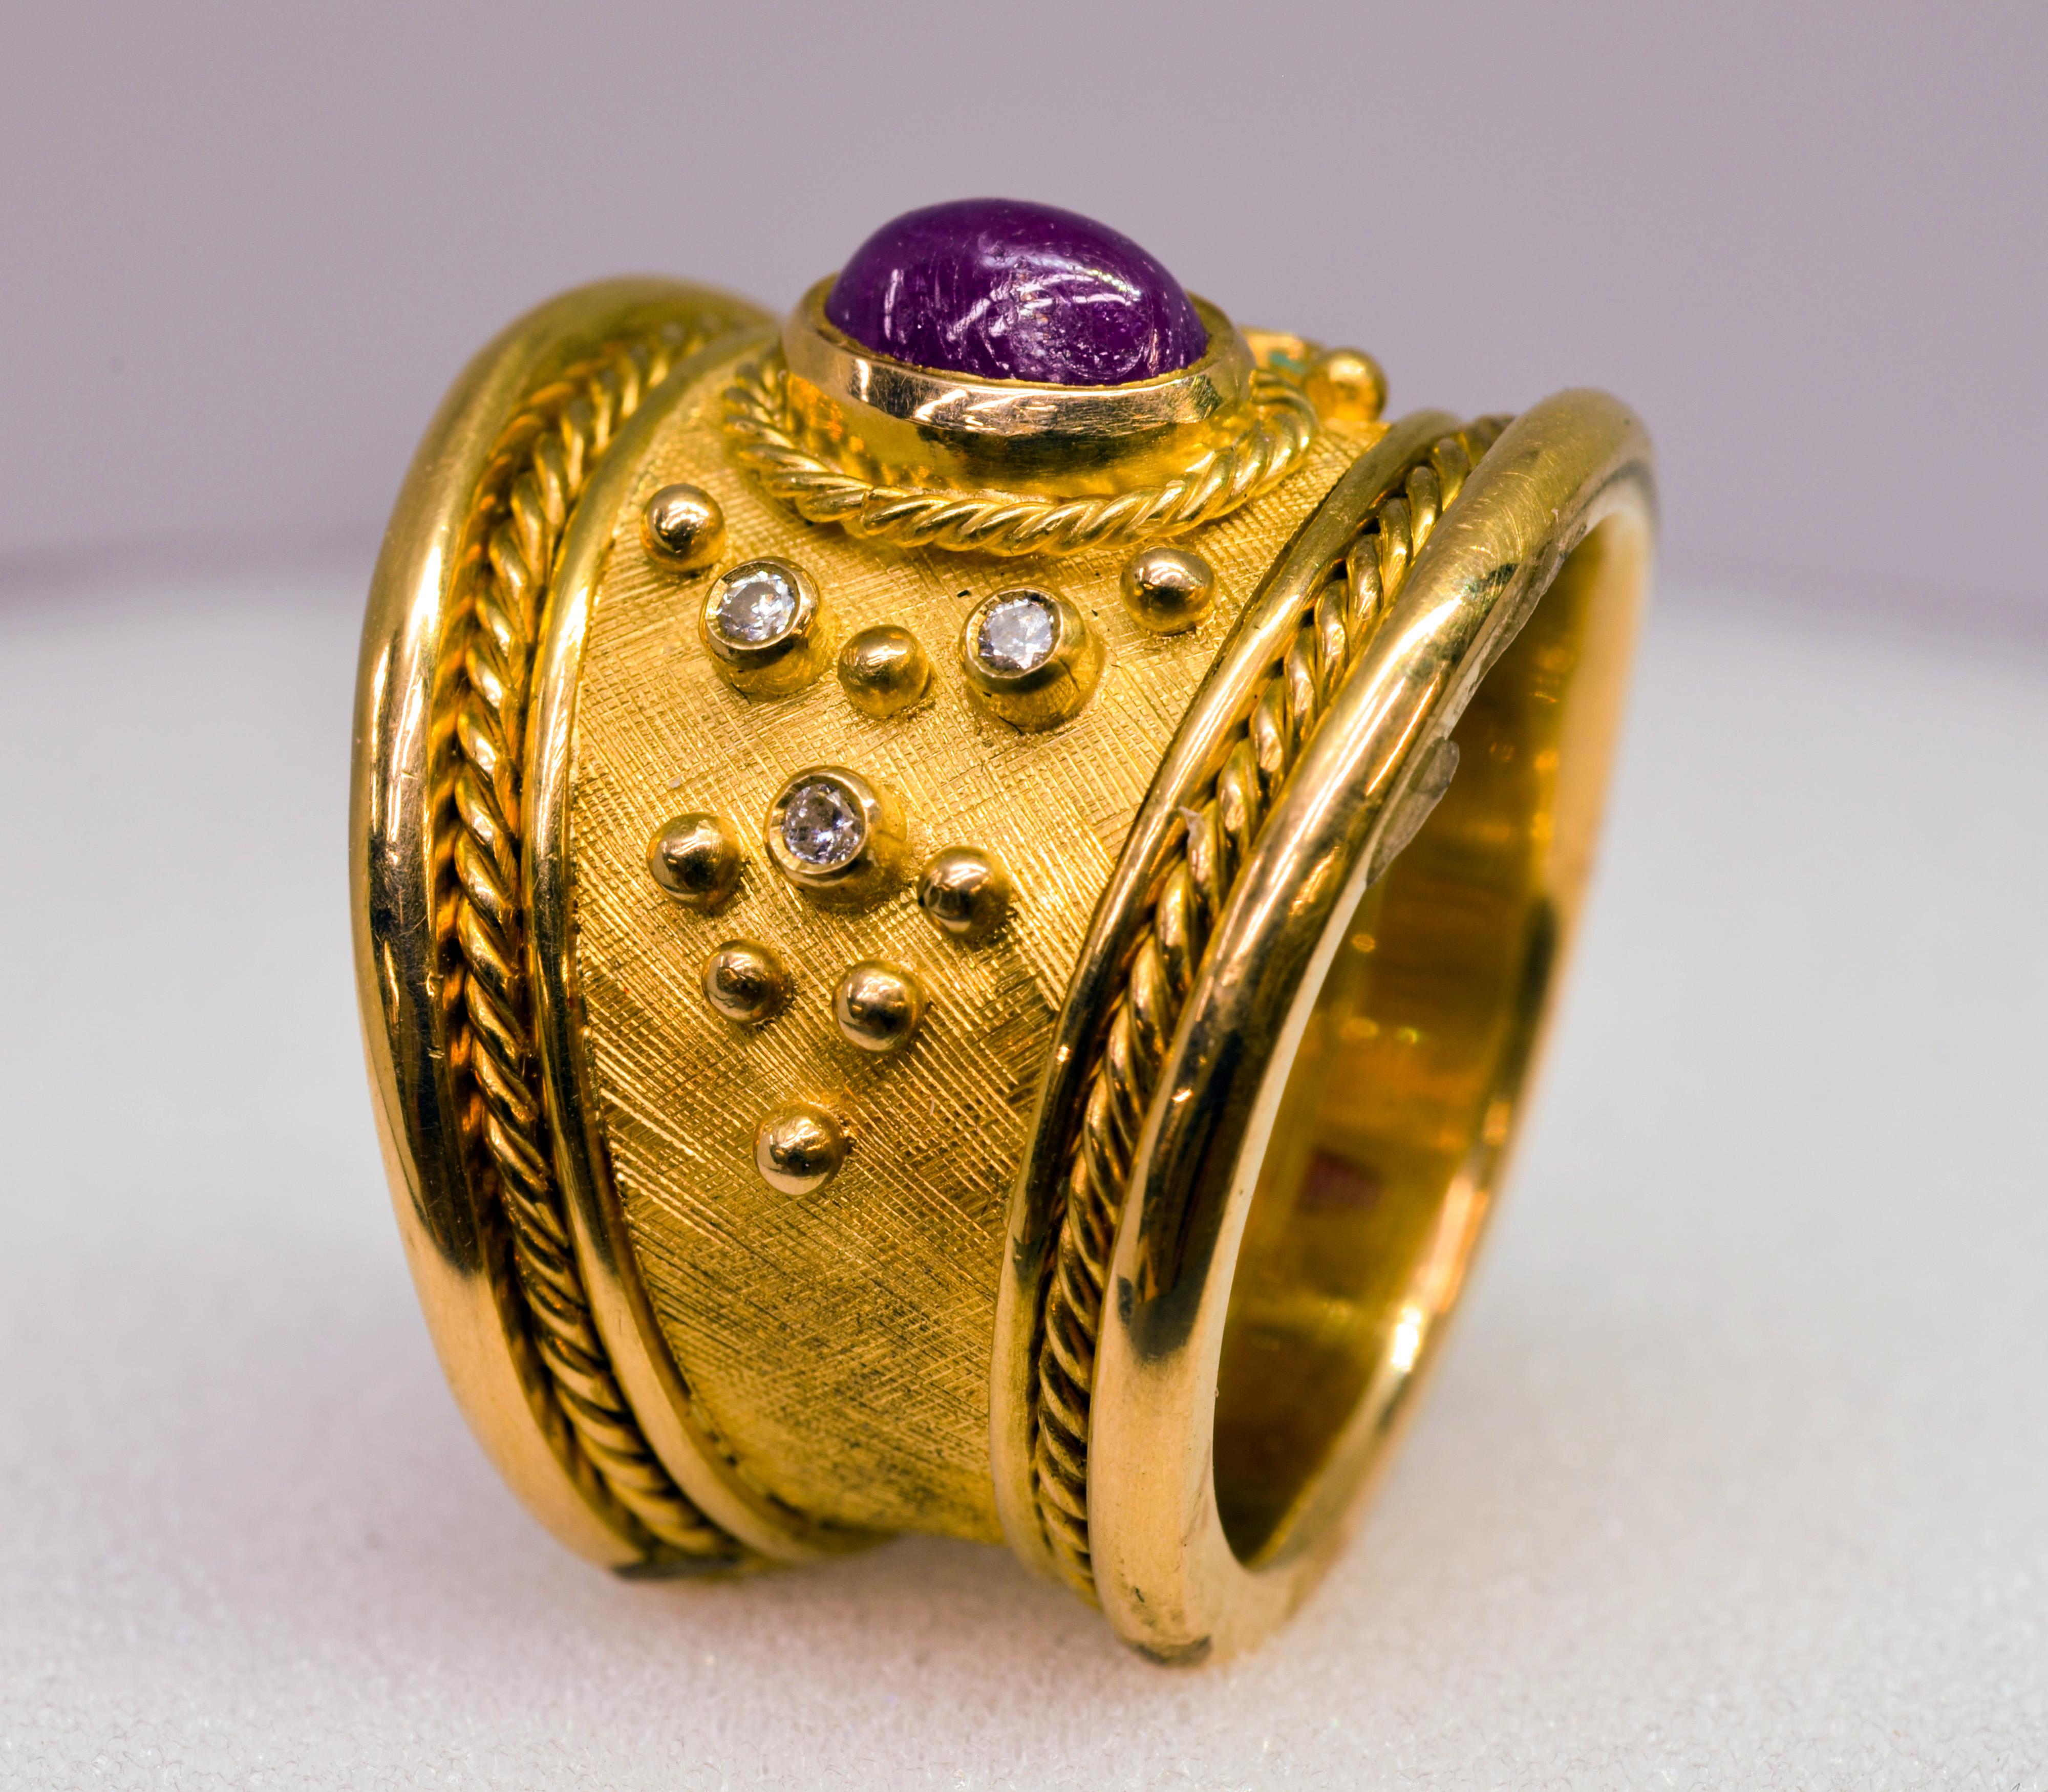 18 Karat Yellow Gold Handmade Diamond and Ruby Tapered Cigar Band Ring.
This bold ring is handcrafted in 18 Karat gold and is set with a Cabochon cut Ruby and six small round Diamonds. This style is sometimes called “Templar” or “Cigar Band”. It is